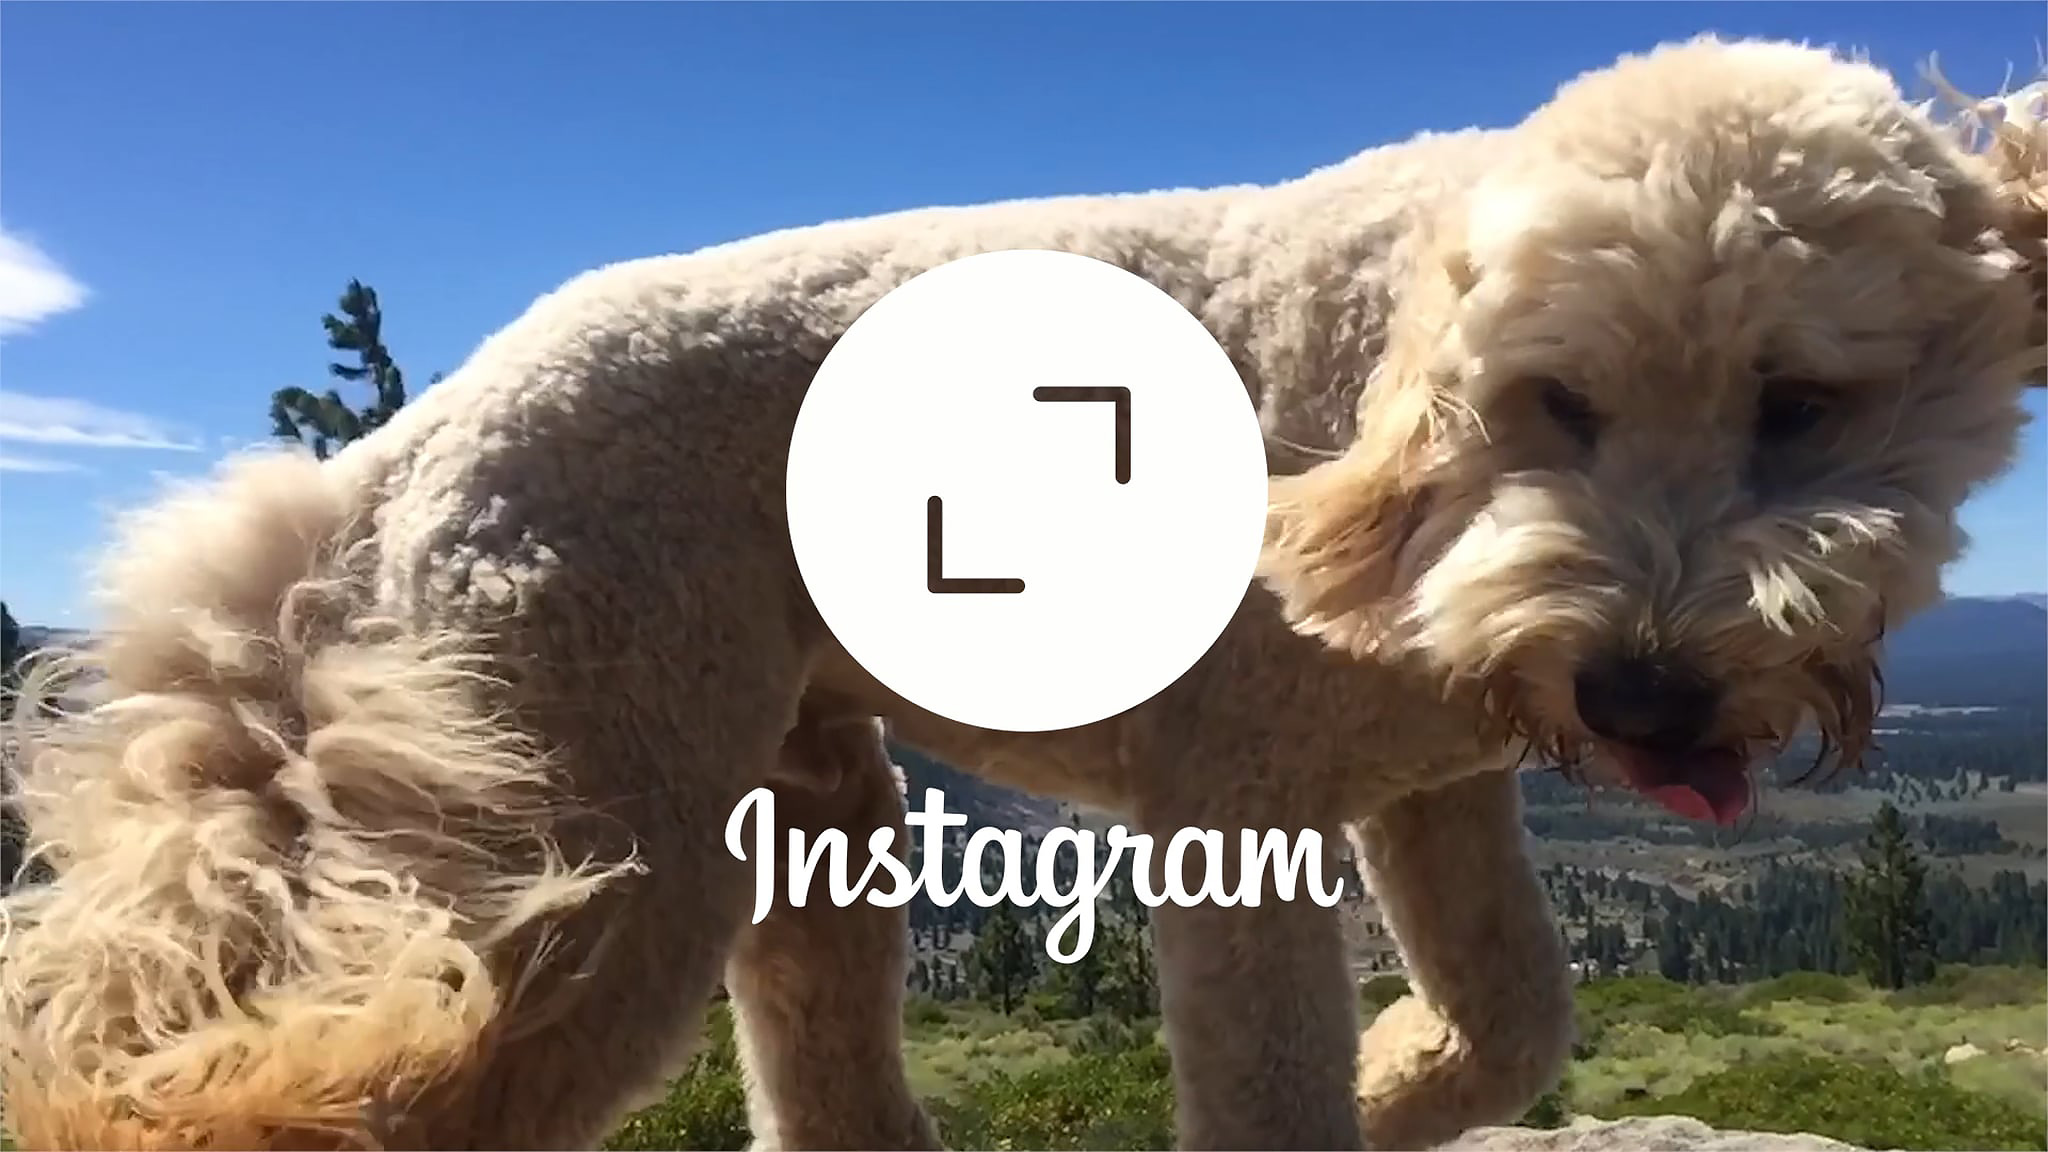 You no longer have to upload square photos to Instagram!